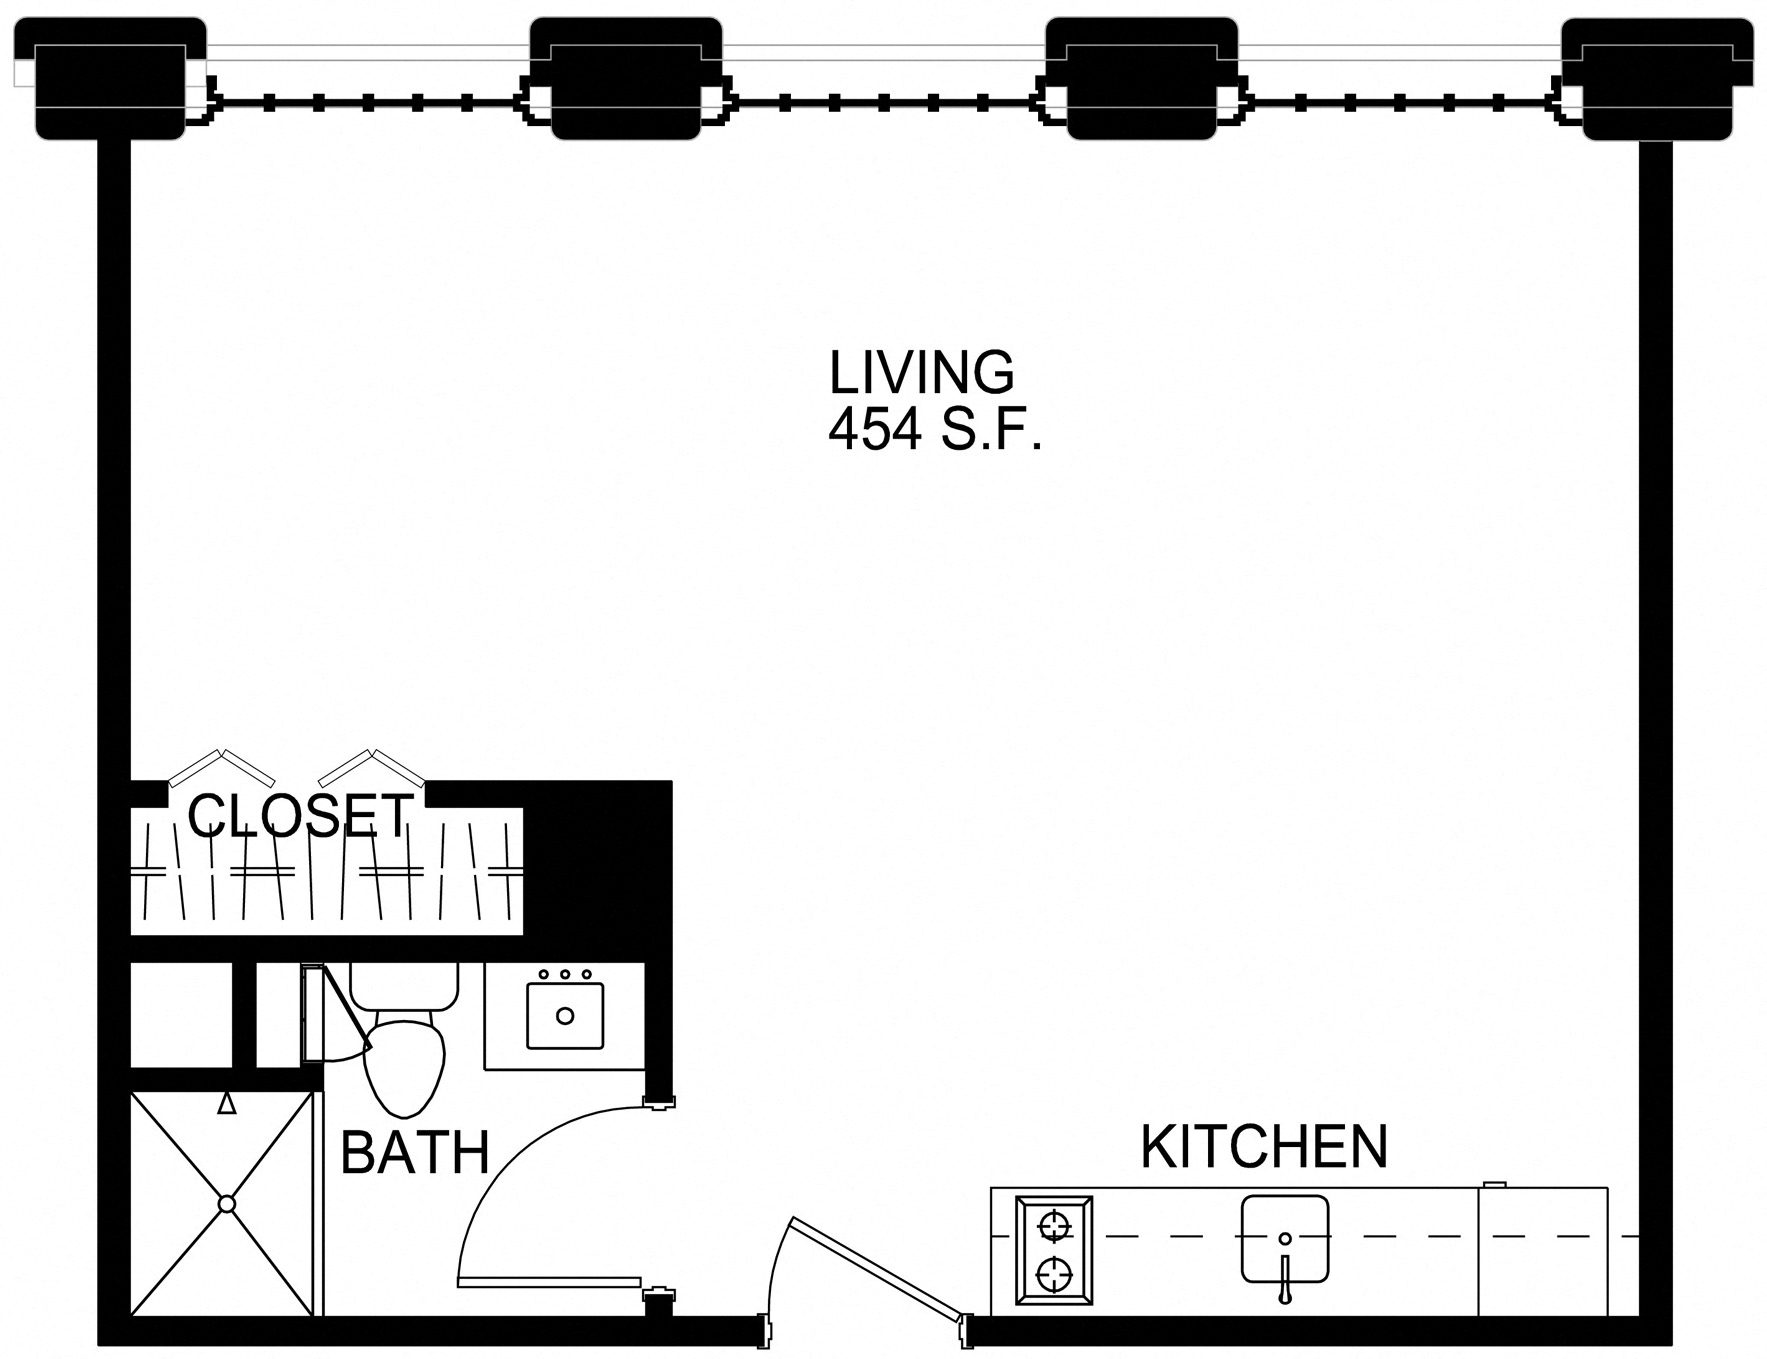 Floorplan for Apartment #S2510, 0 bedroom unit at Halstead Providence